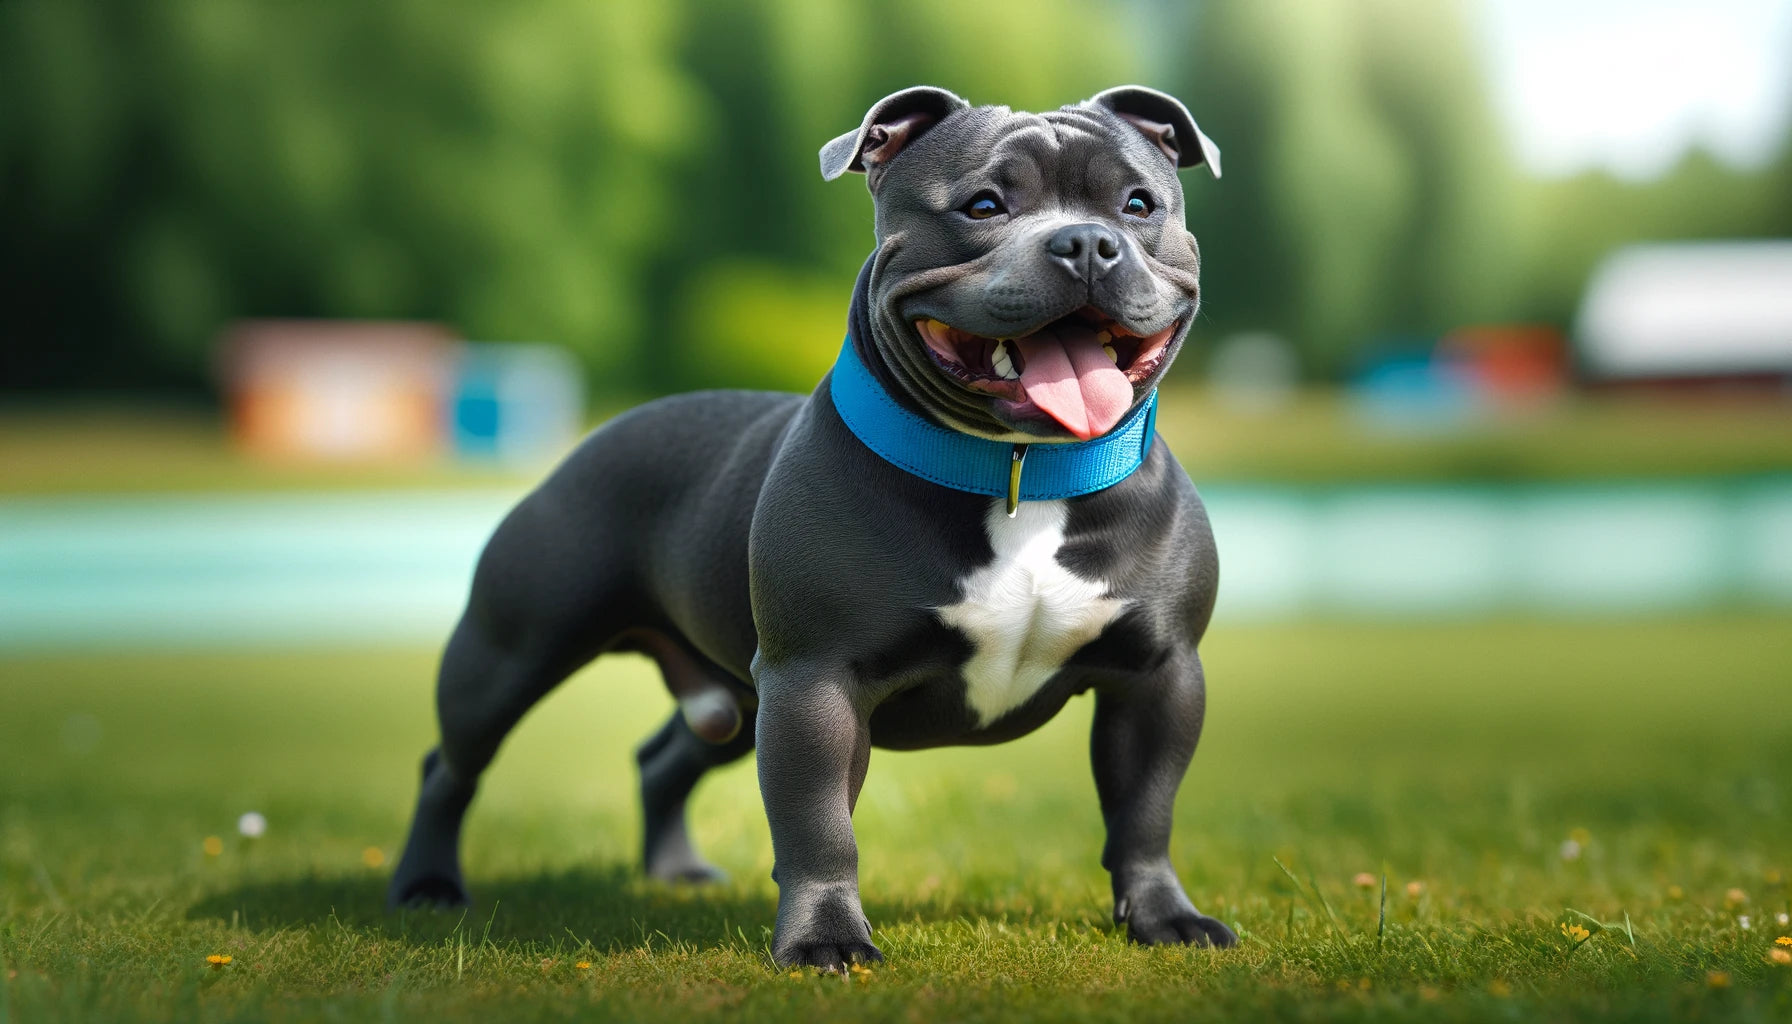 Blue Staffordshire Bull Terrier (Blue Staffy) Standing Outdoors